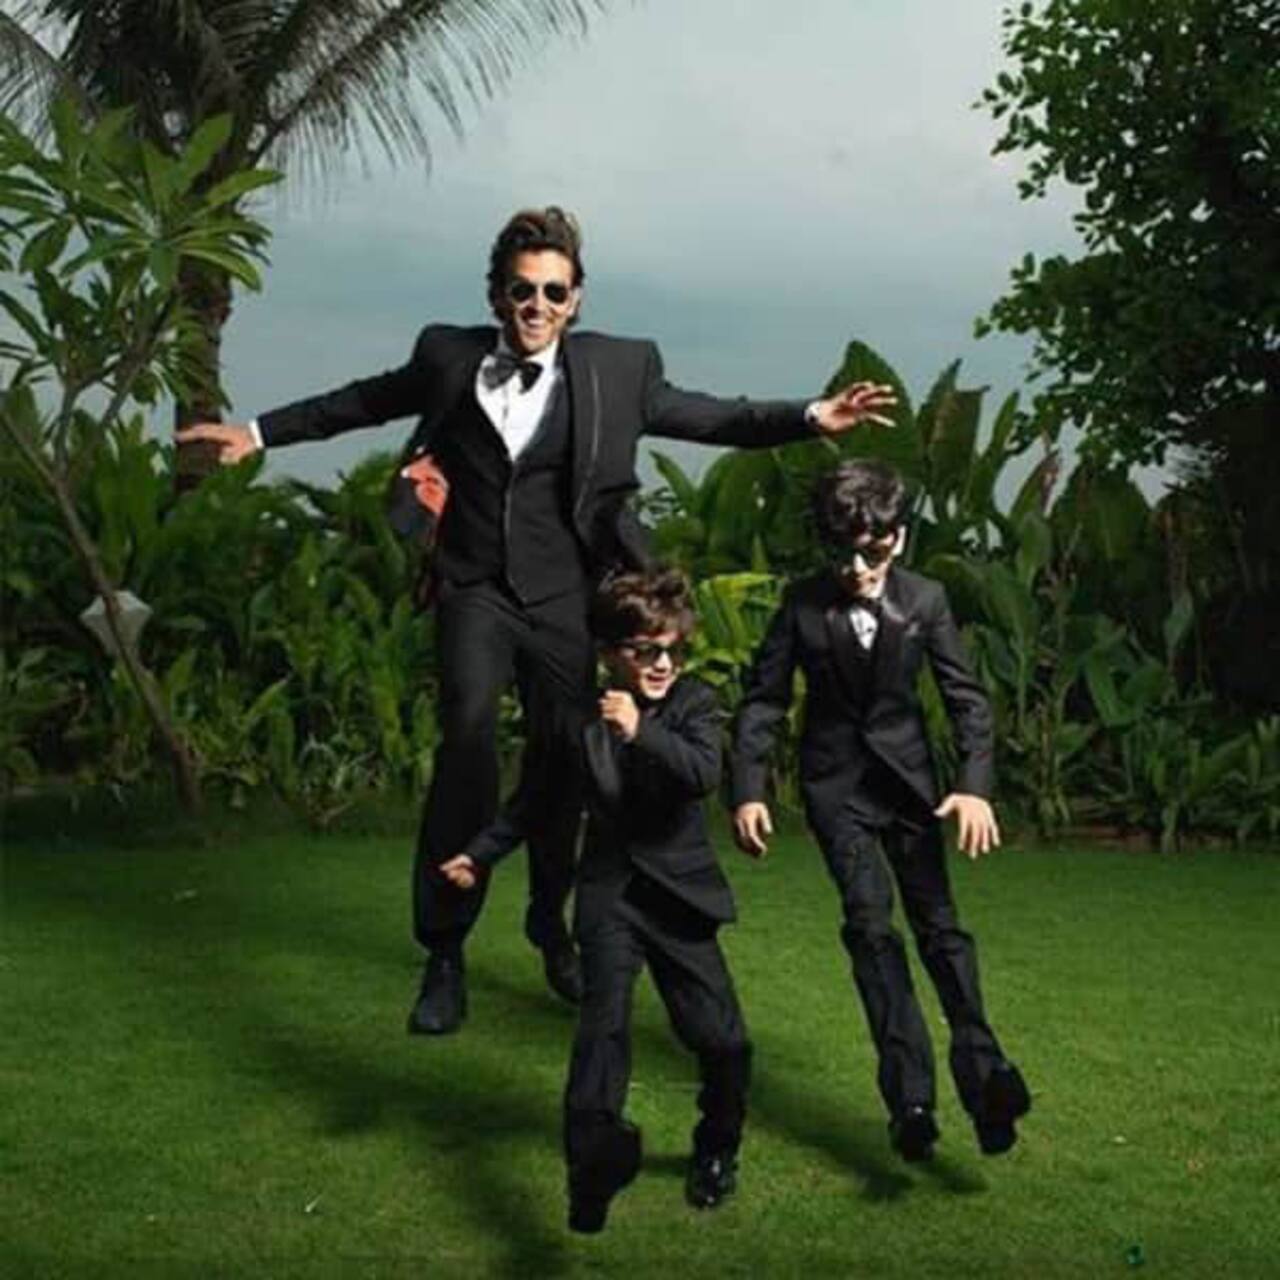 Hrithik Roshan and his sons Hrehaan and Hridhaan